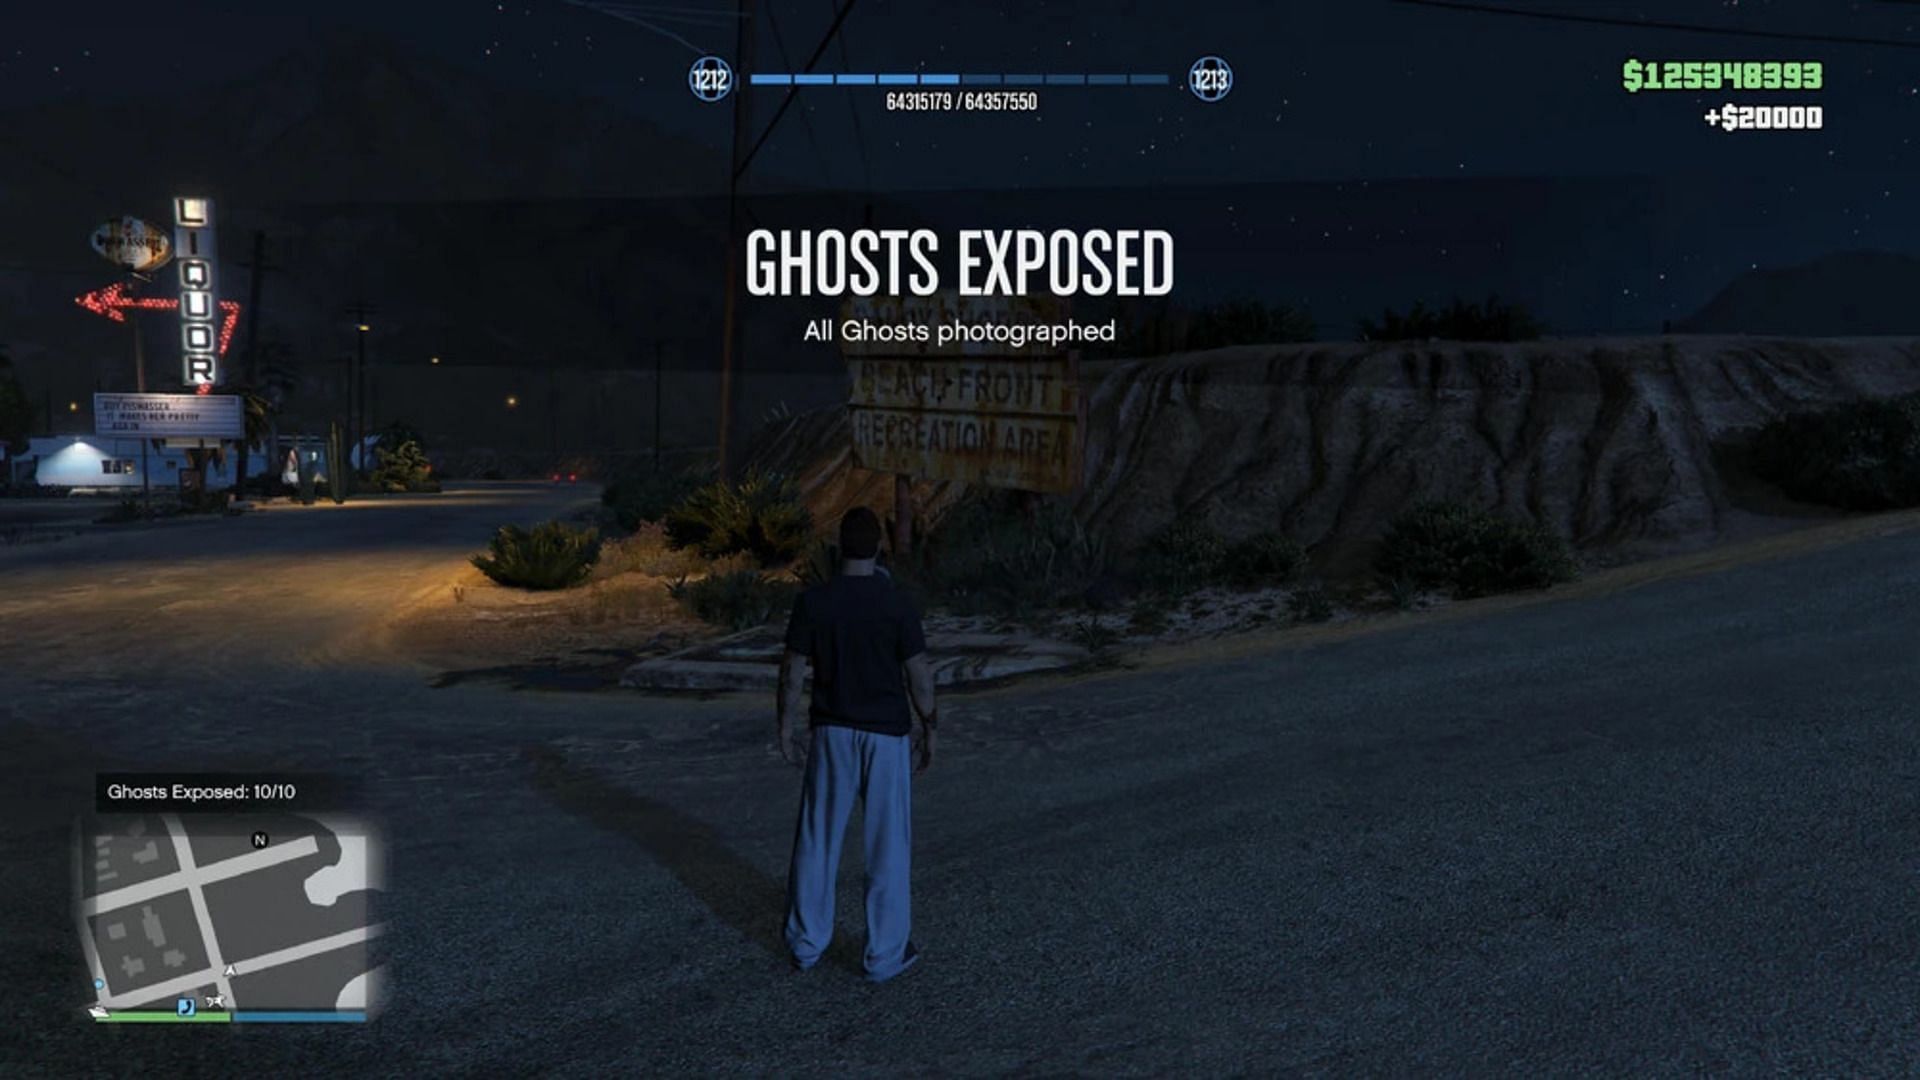 All ghost locations in GTA Online Ghosts Exposed for earning $250k